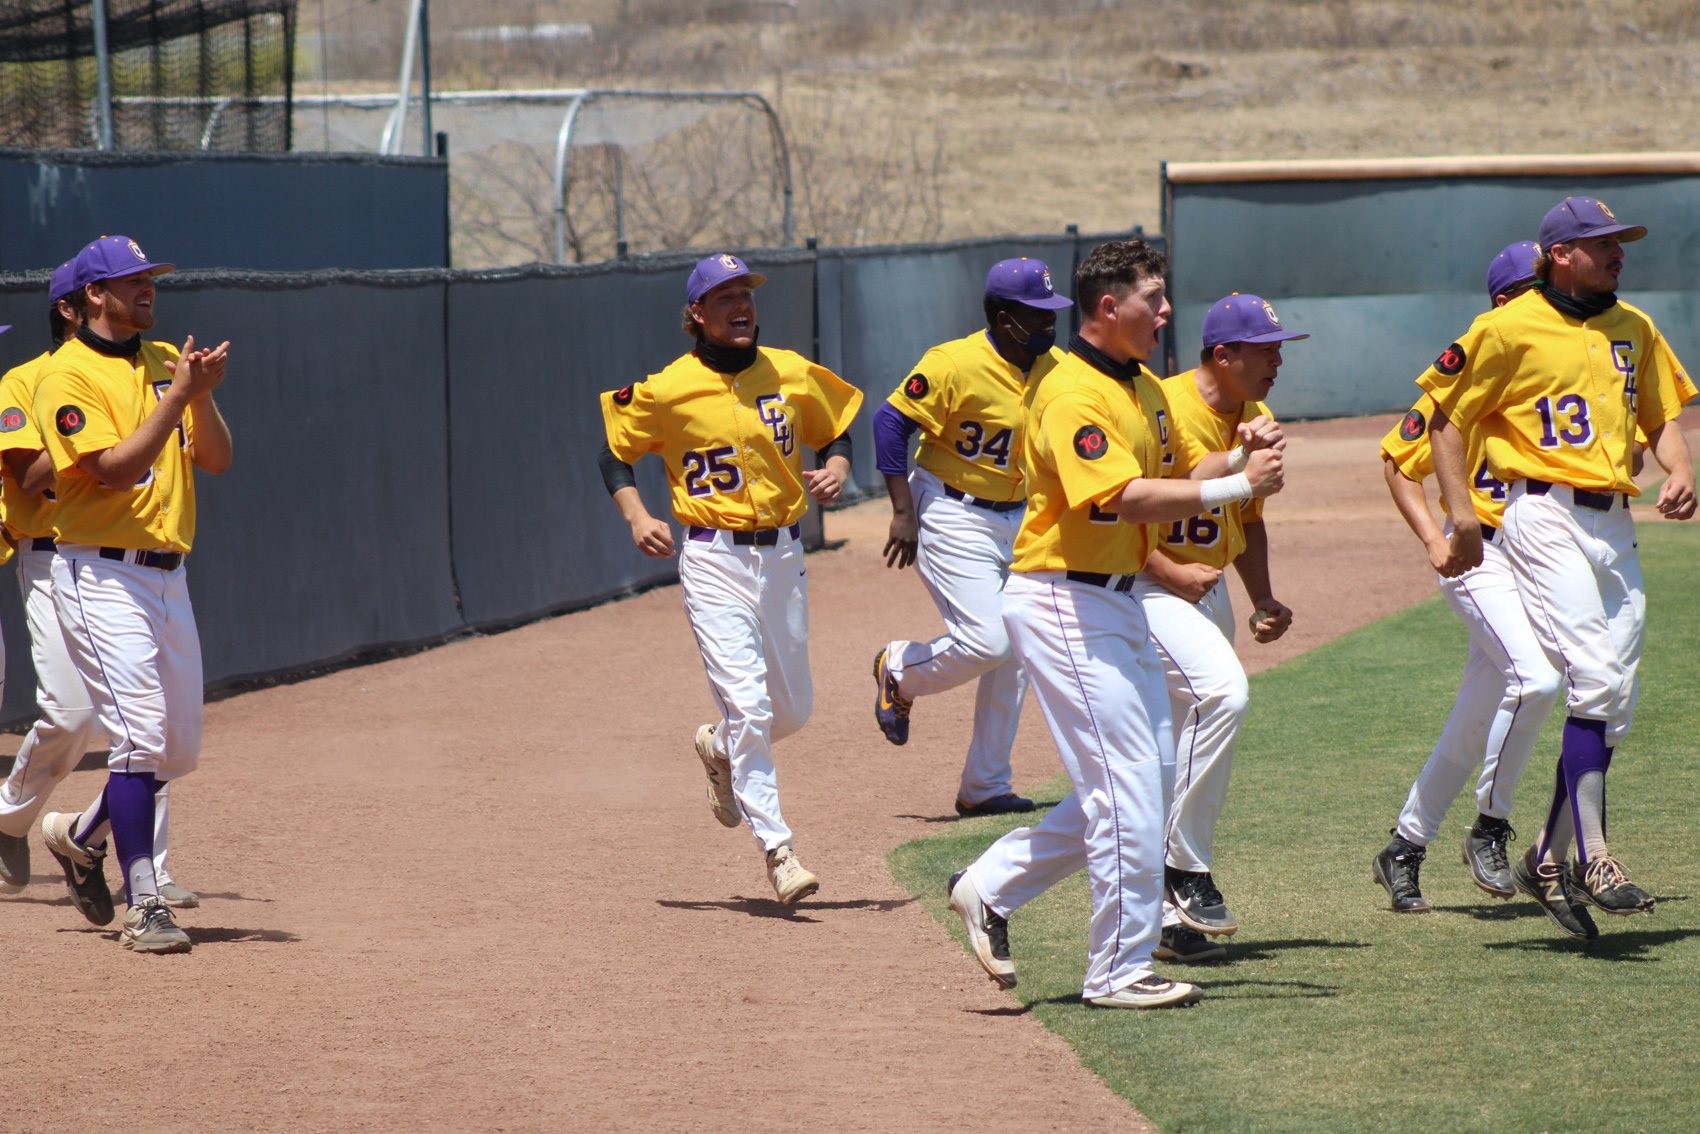 Electrifying Victory as Kingsmen Take Series from Redlands